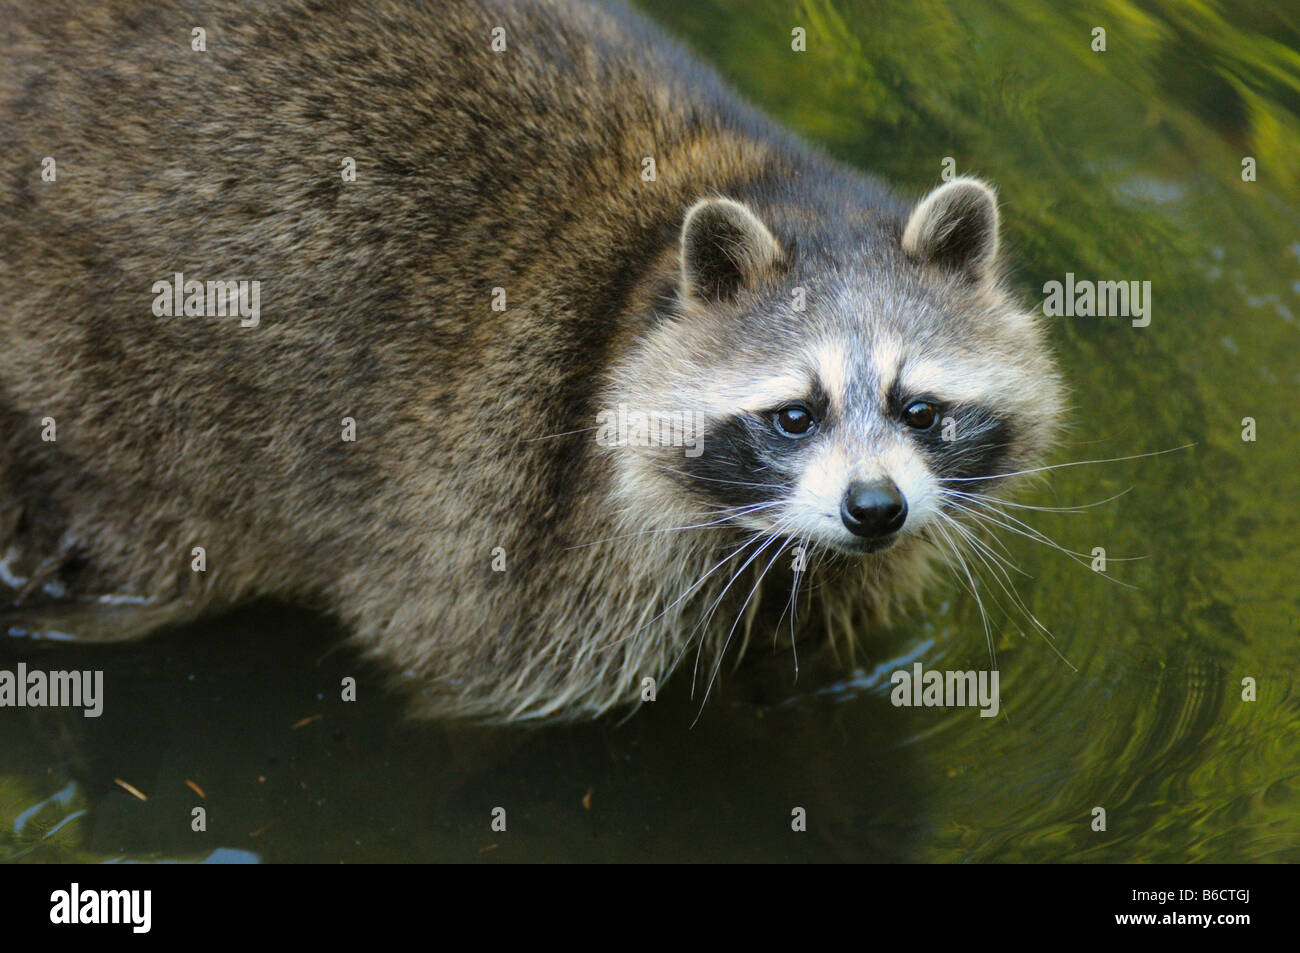 High angle view of Raccoon (Procyon lotor) standing in water Stock Photo